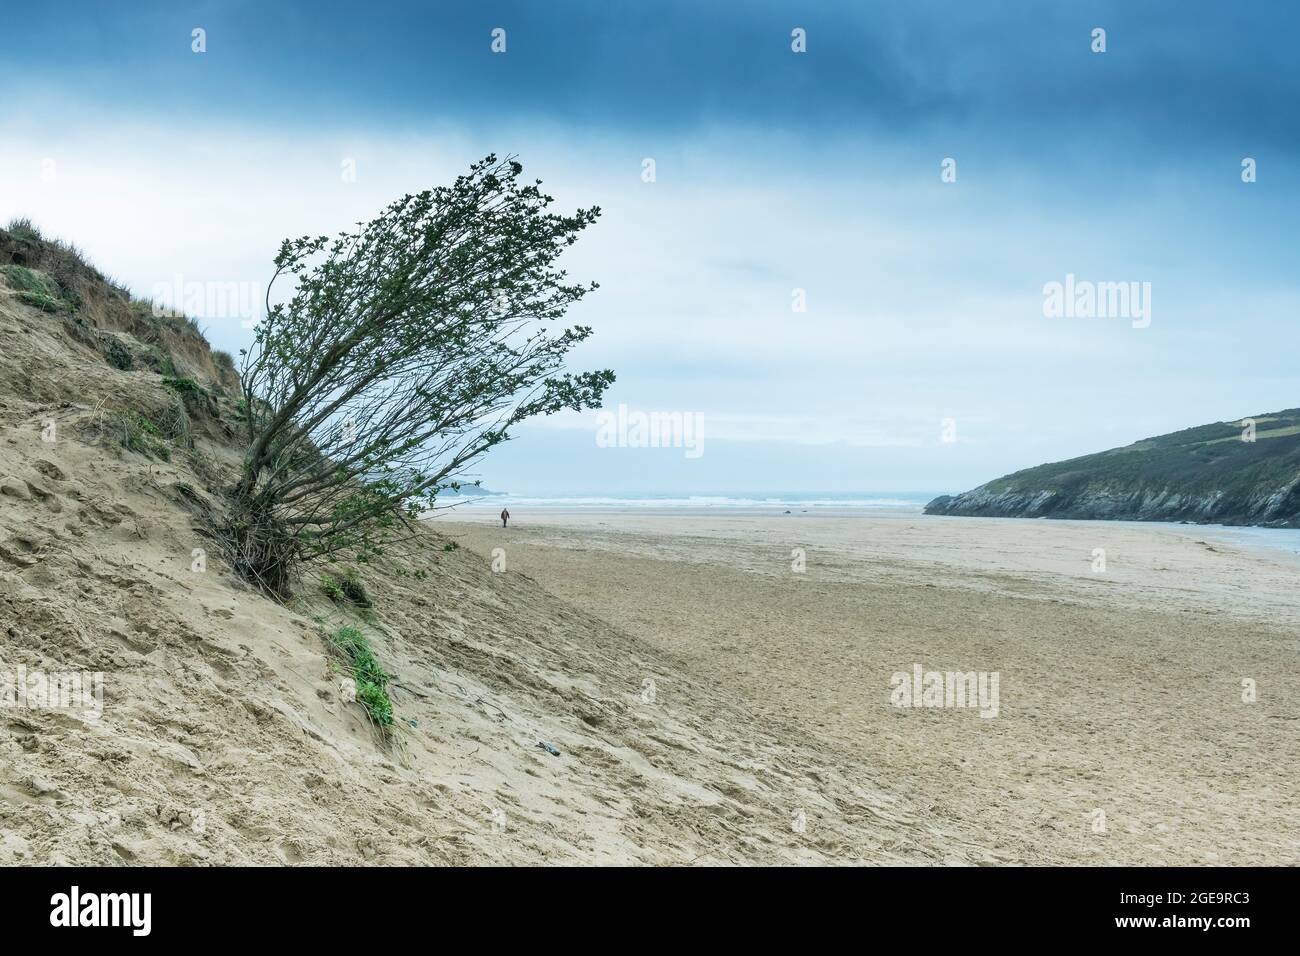 A tree growing out from the slope of the sand dune system on Crantock Beach in Newquay in Cornwall. Stock Photo